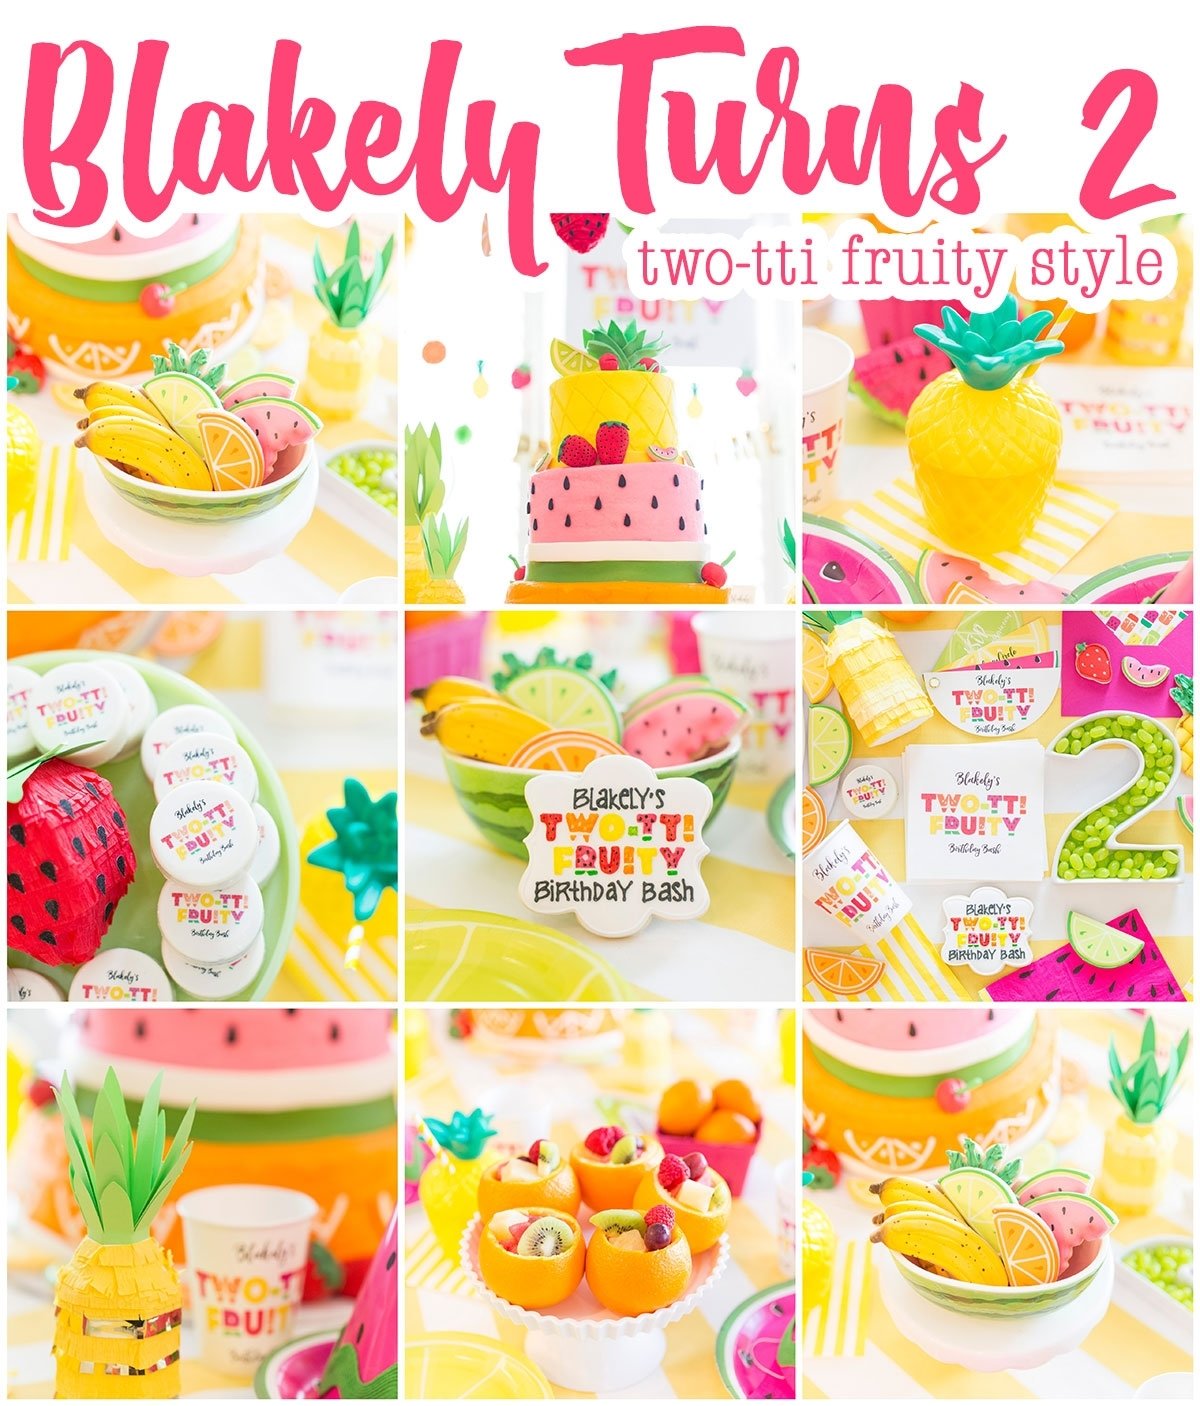 10 Awesome Two Year Old Birthday Ideas two tti fruity birthday party blakely turns 2 pizzazzerie 11 2022